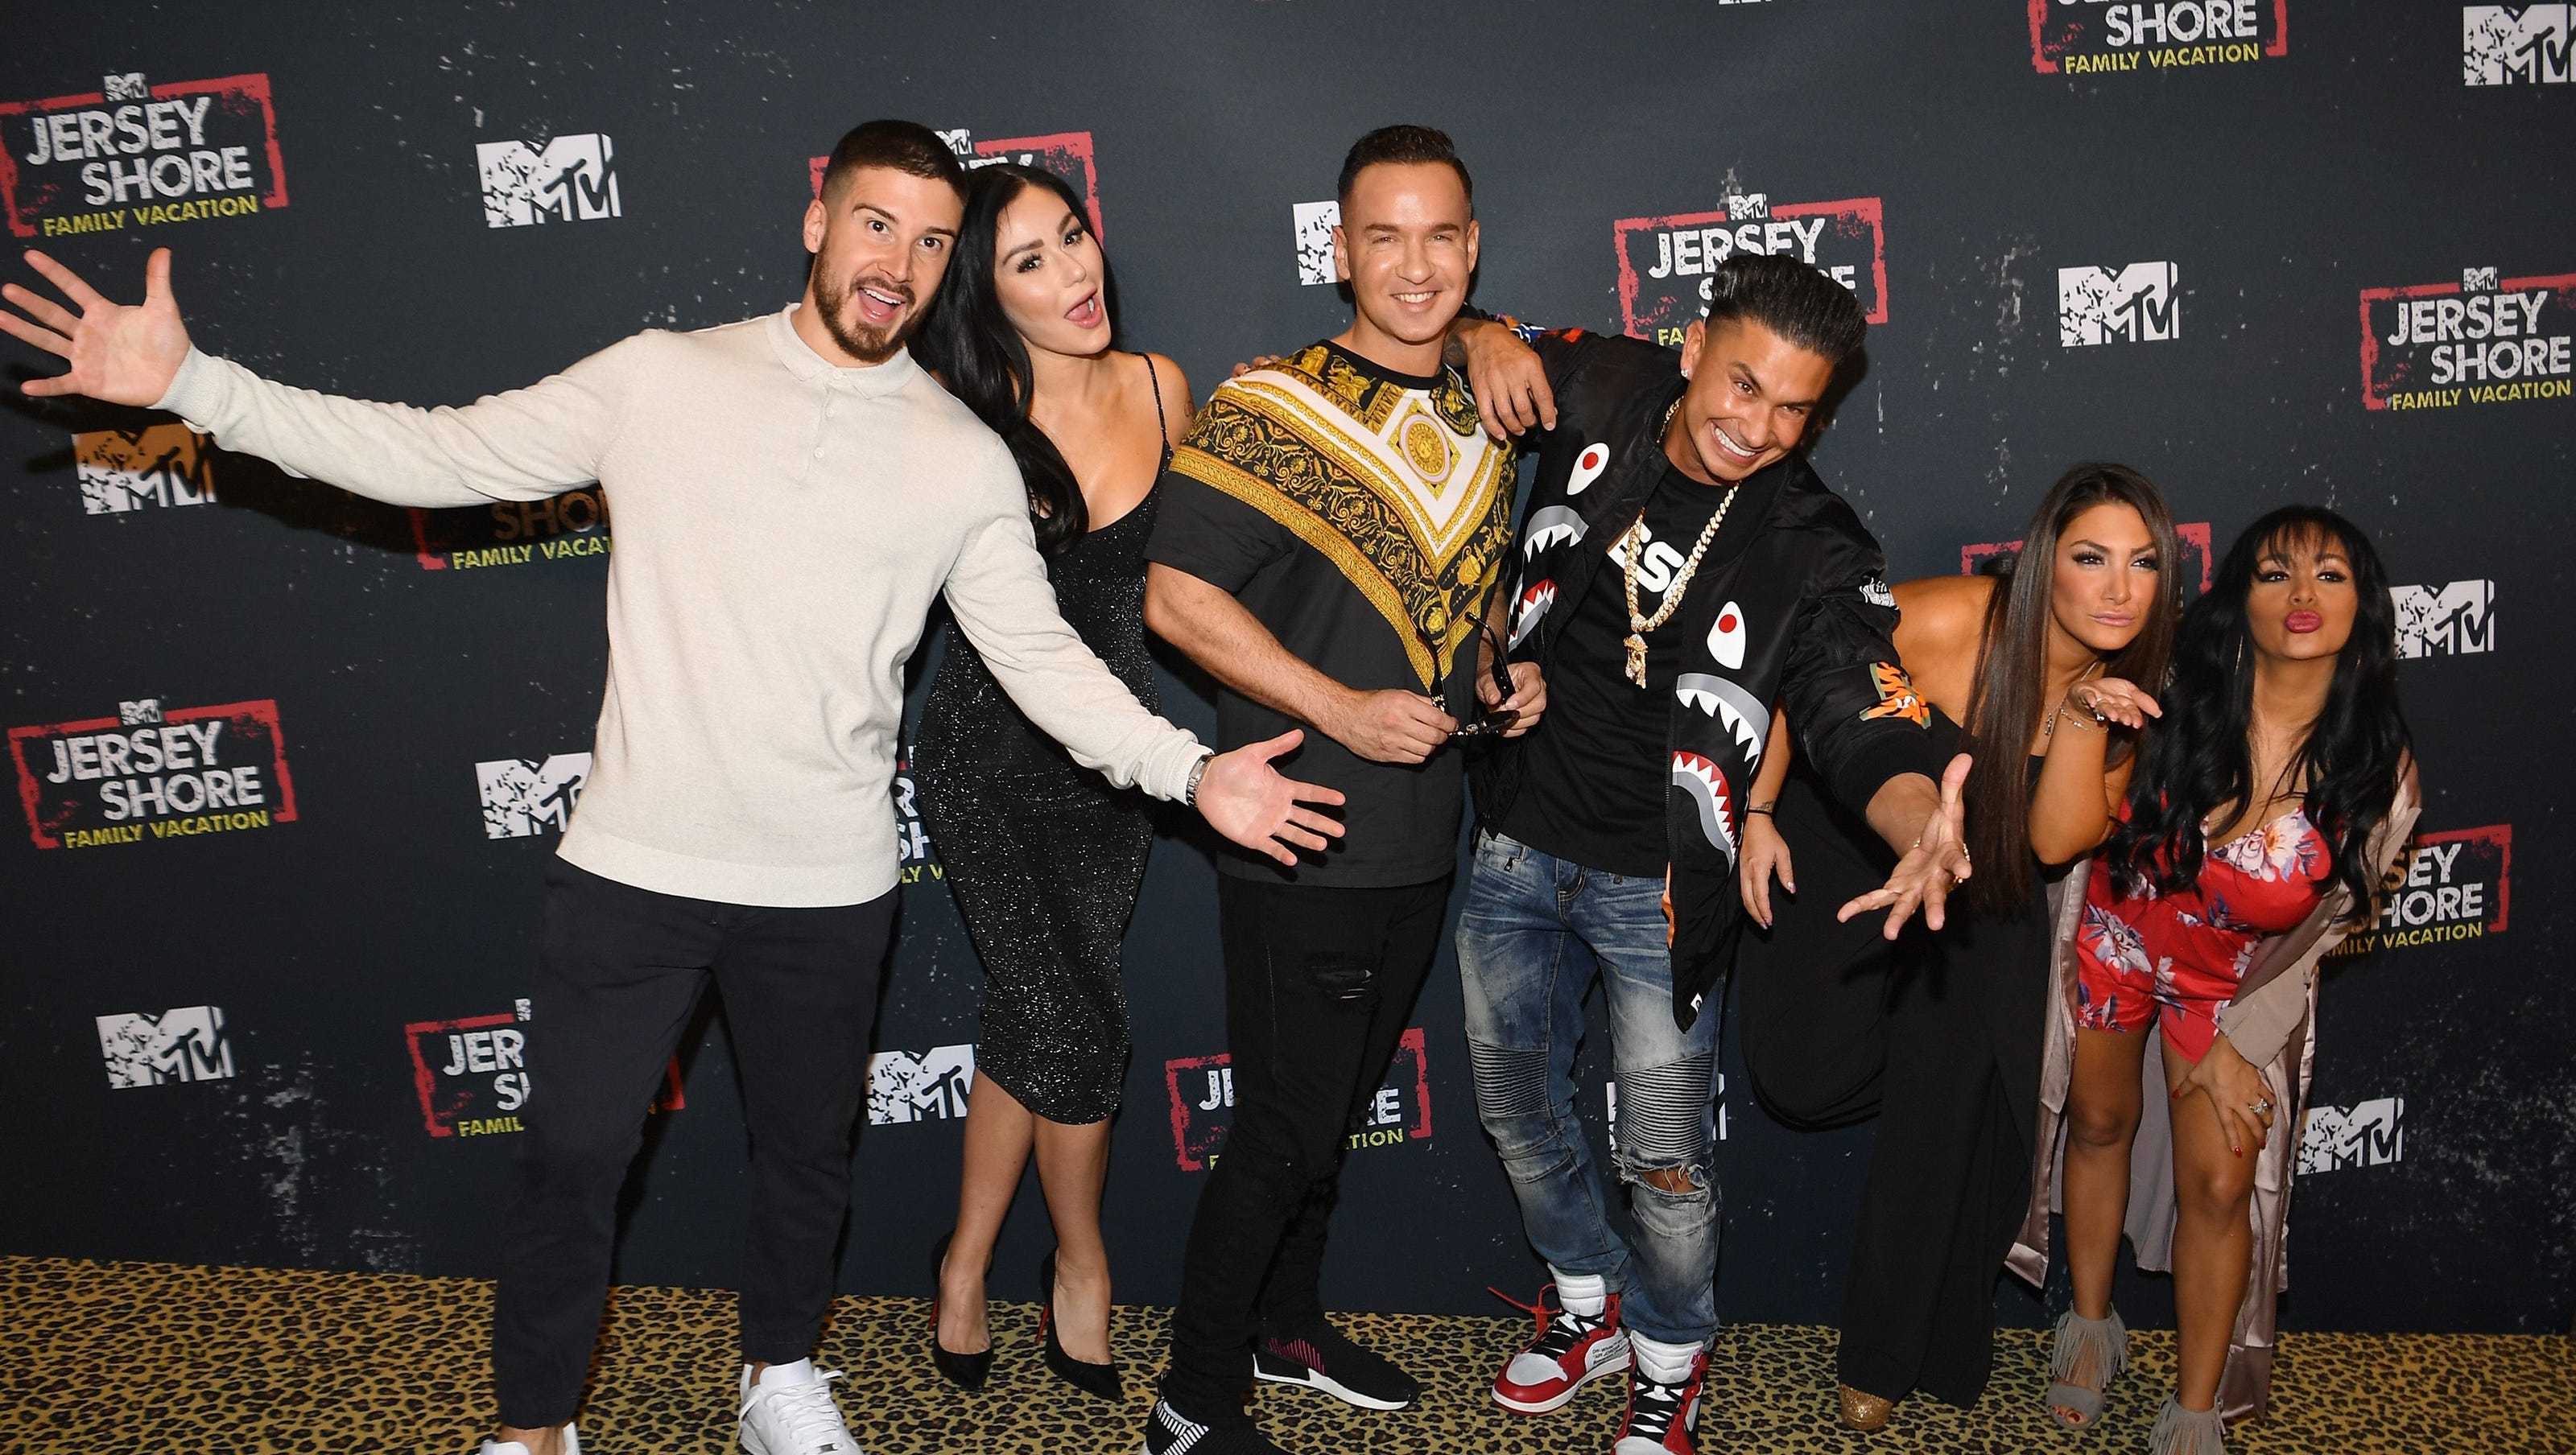 Jersey Shore Family Vacation: Snooki, Situation and Taylor ham vs. pork rol...